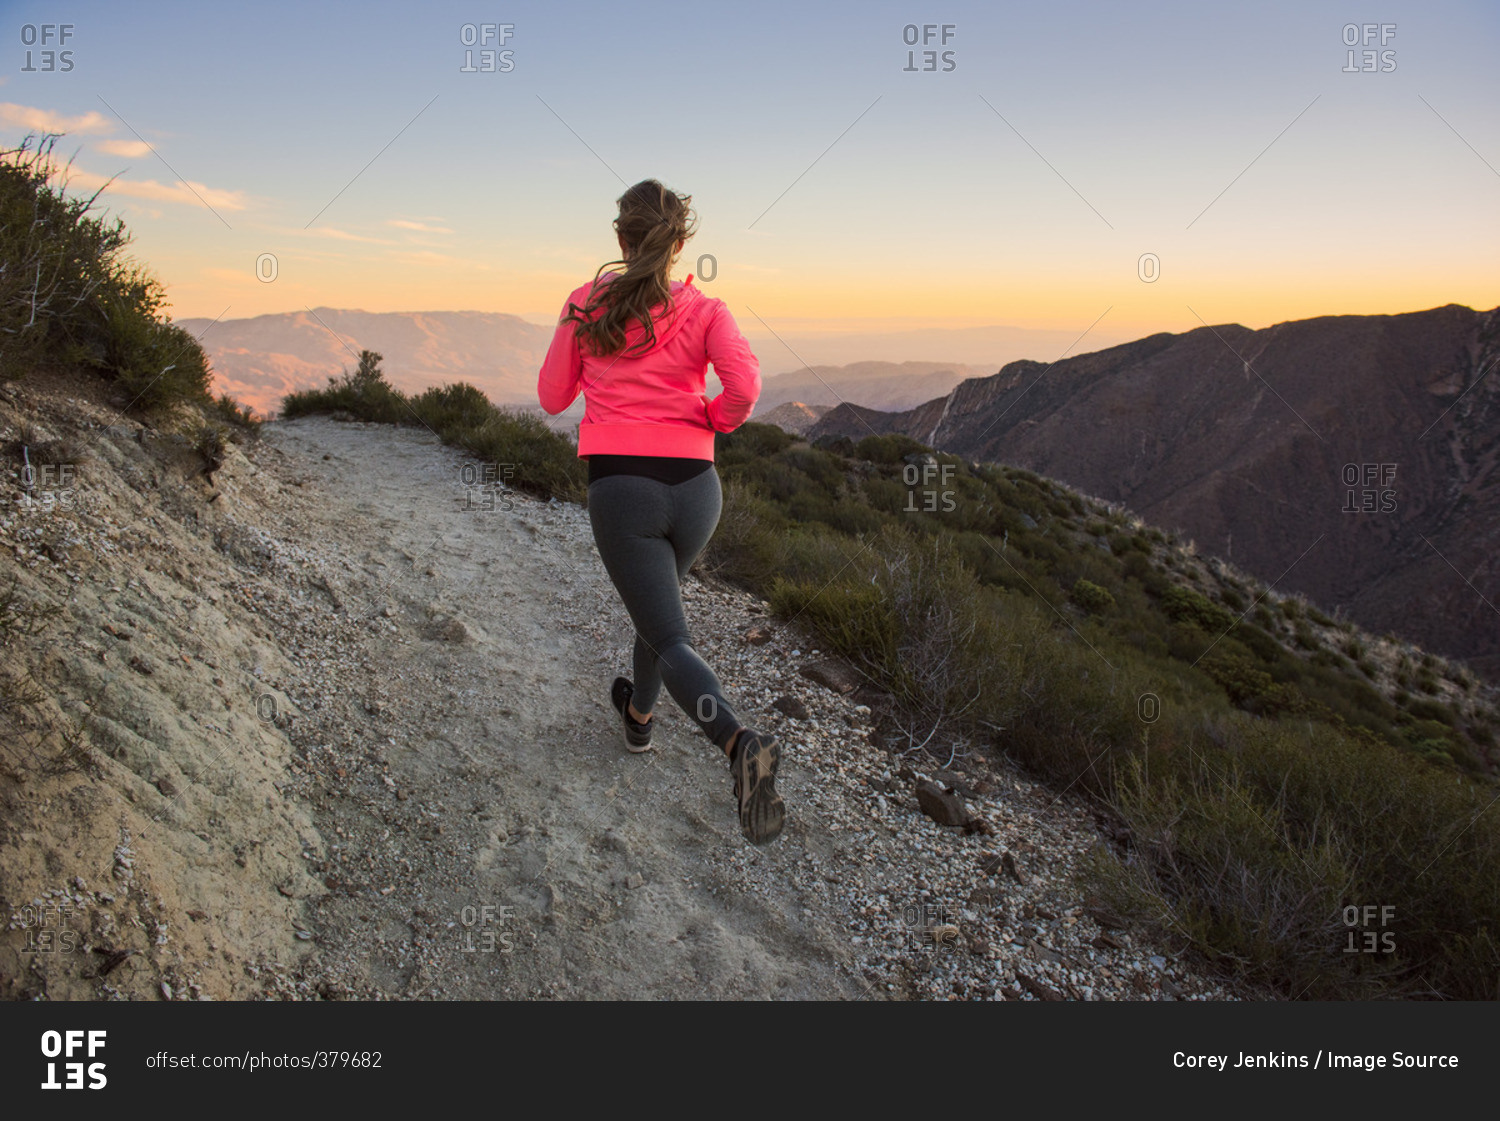 Rear view of young woman trail running up dirt track at dusk on Pacific Crest Trail, Pine Valley, California, USA